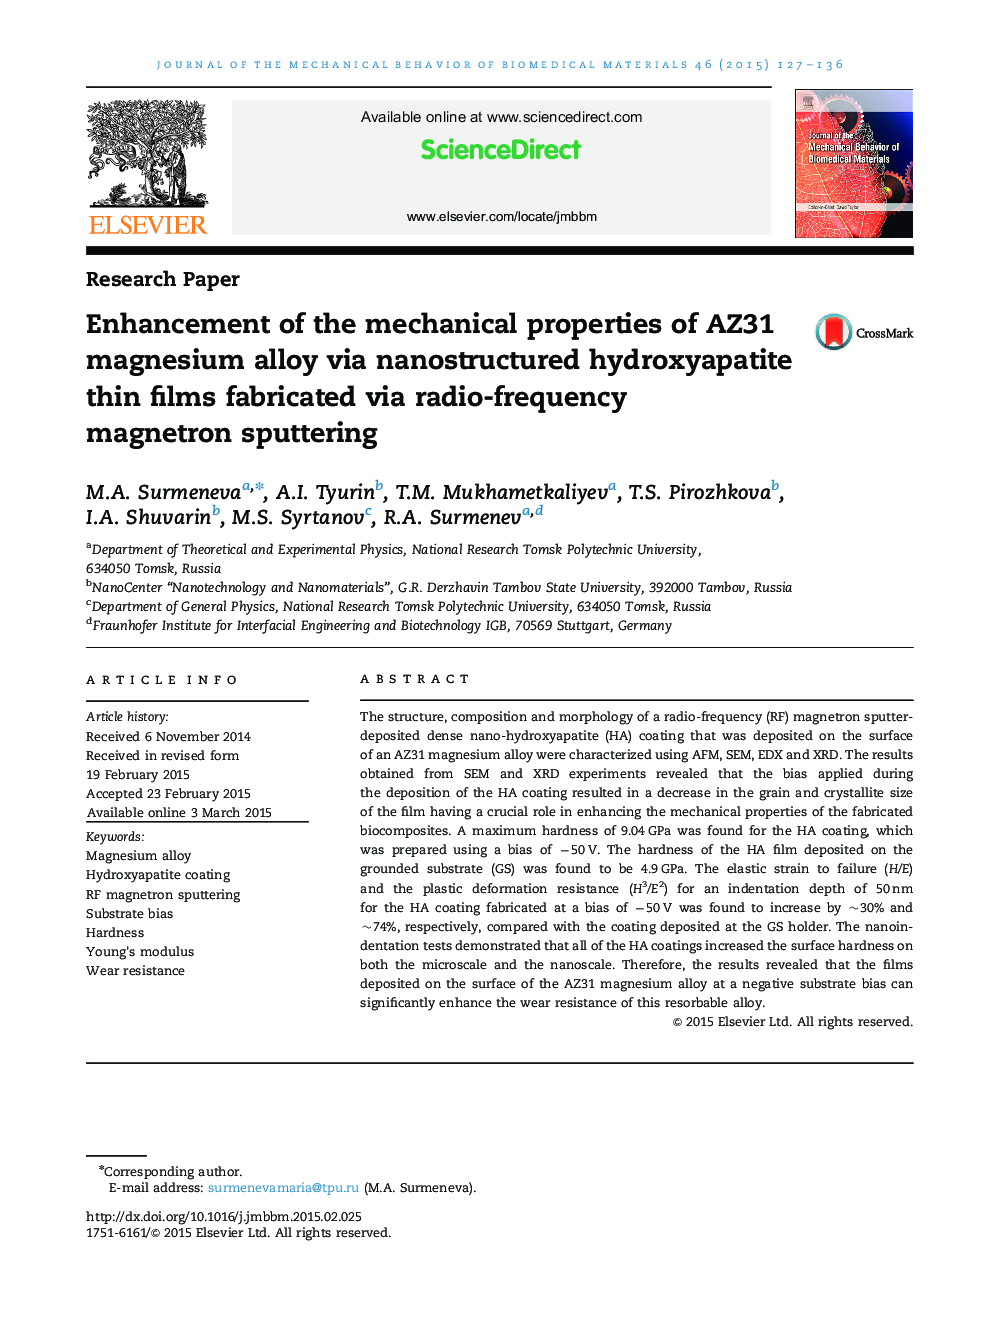 Enhancement of the mechanical properties of AZ31 magnesium alloy via nanostructured hydroxyapatite thin films fabricated via radio-frequency magnetron sputtering